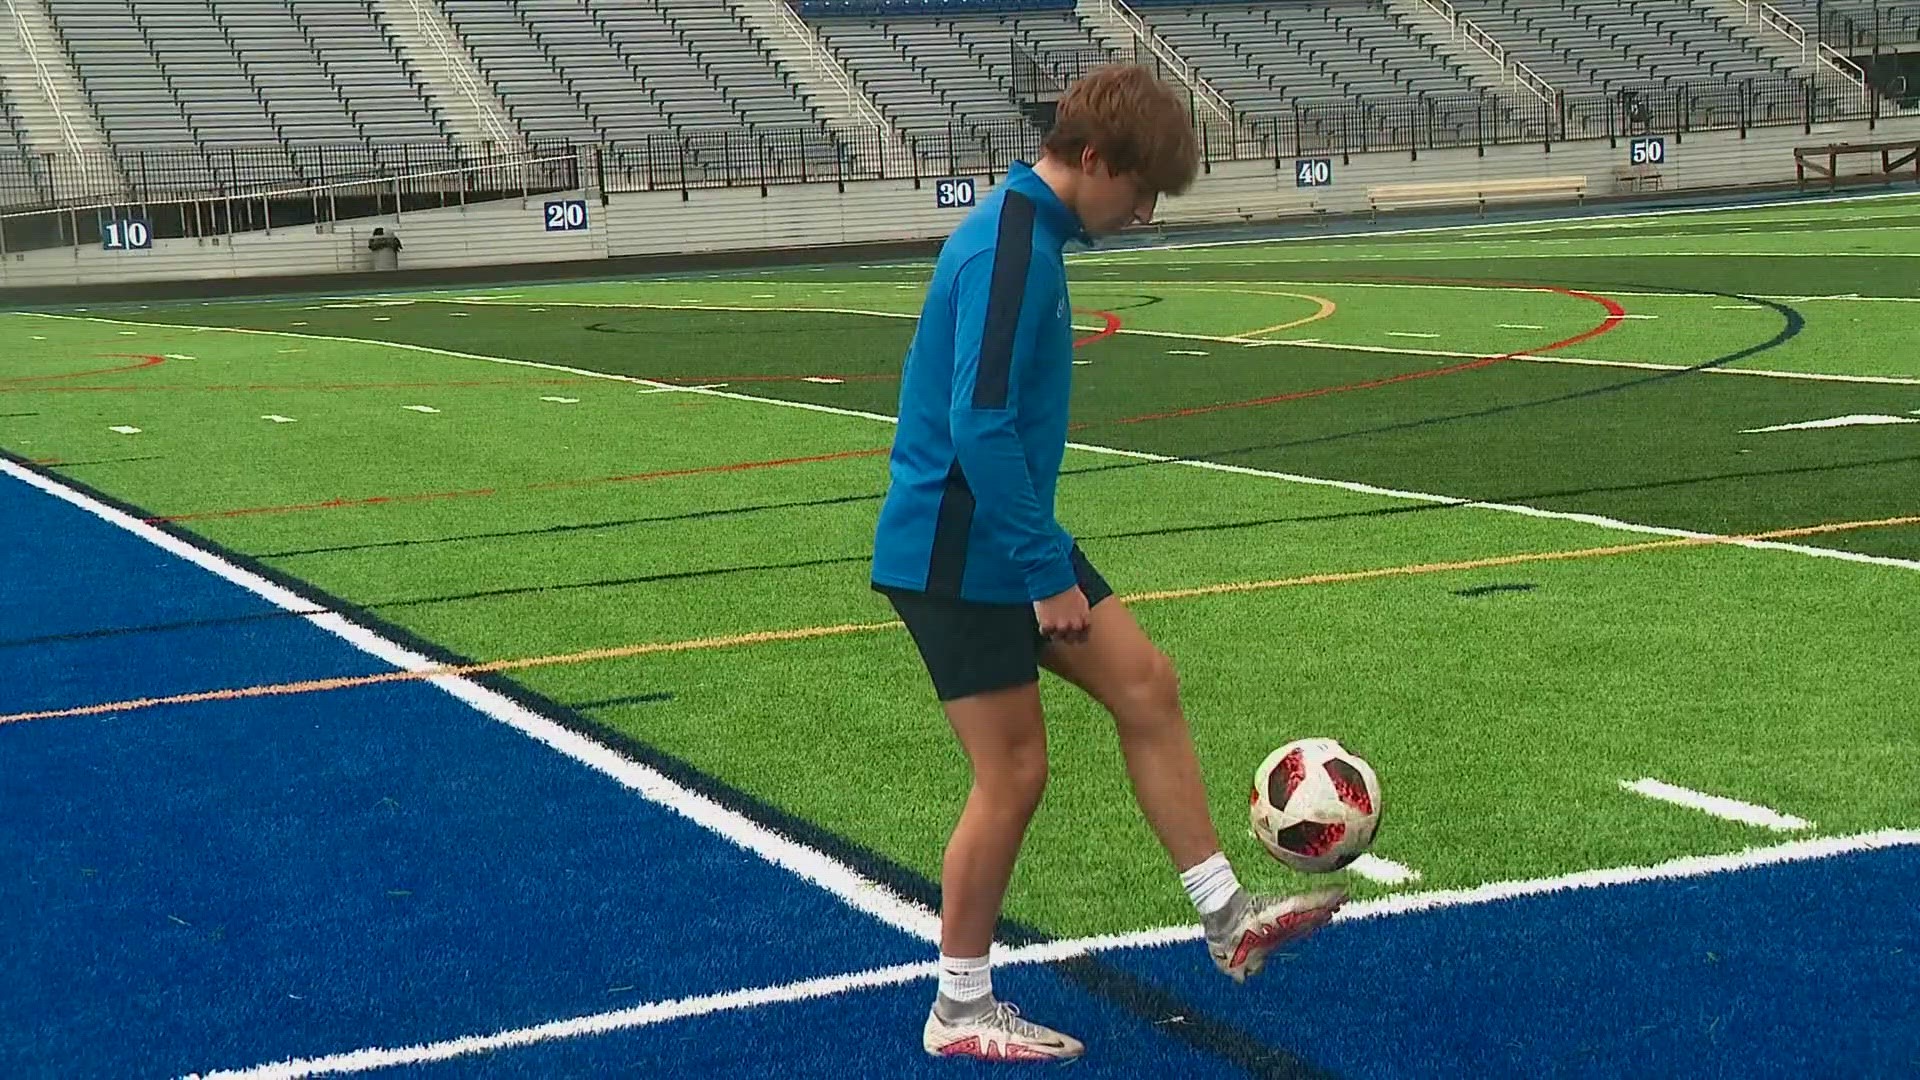 Olentangy Liberty's soccer and football player Braden Scanlon is this week's 10TV Athlete of the Week.